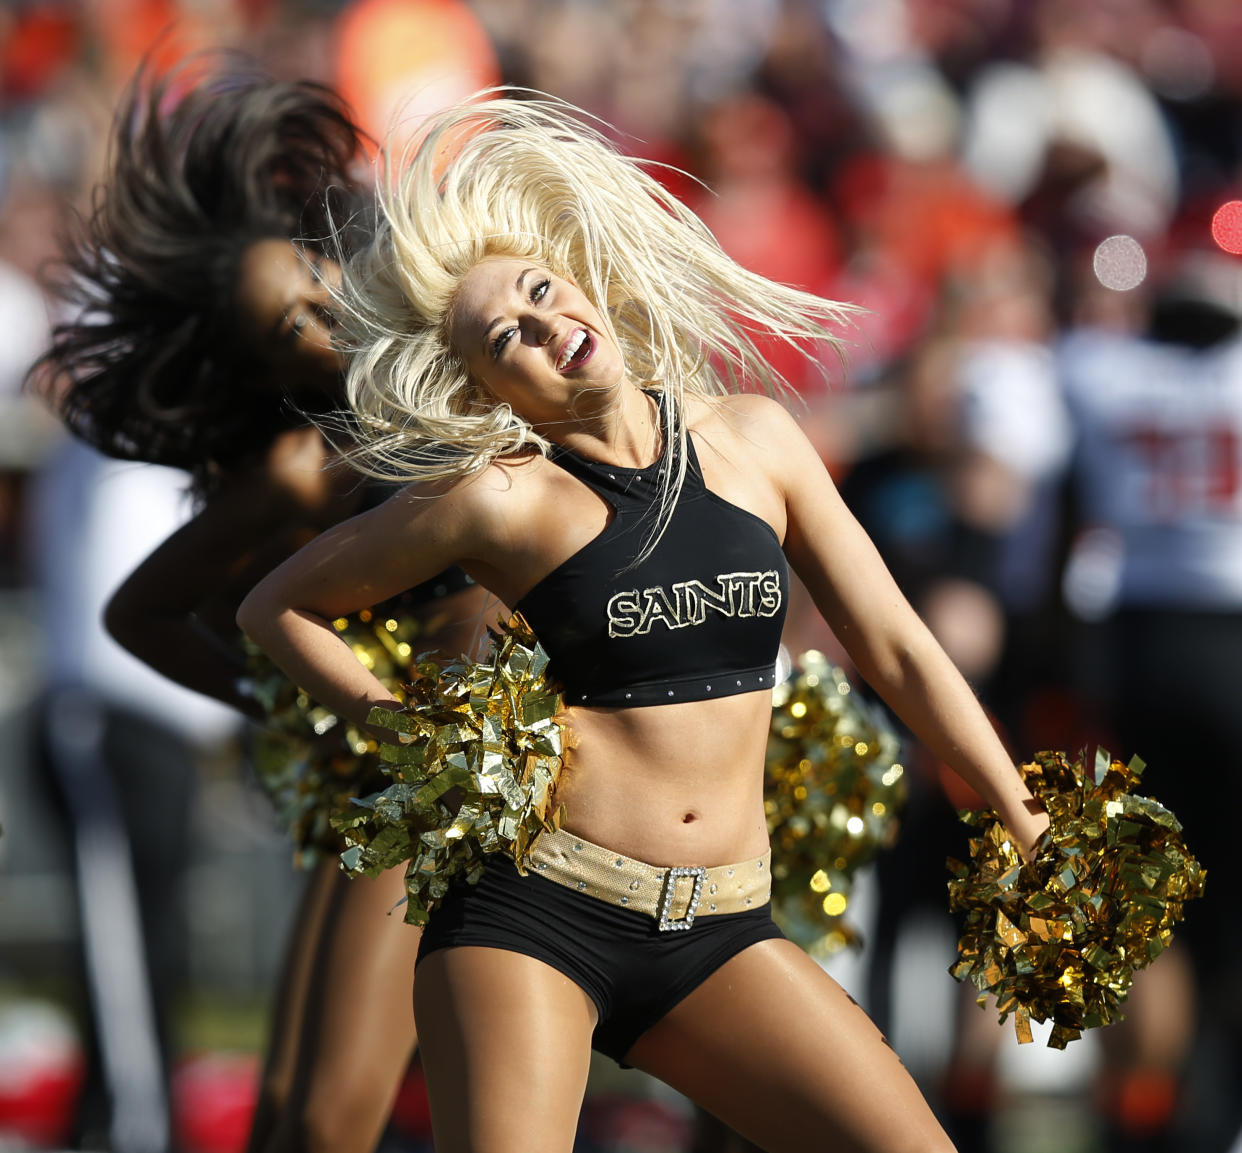 The New Orleans Saintsations is under fire for alleged gender discrimination. (Photo: AP Photo/Brynn Anderson)